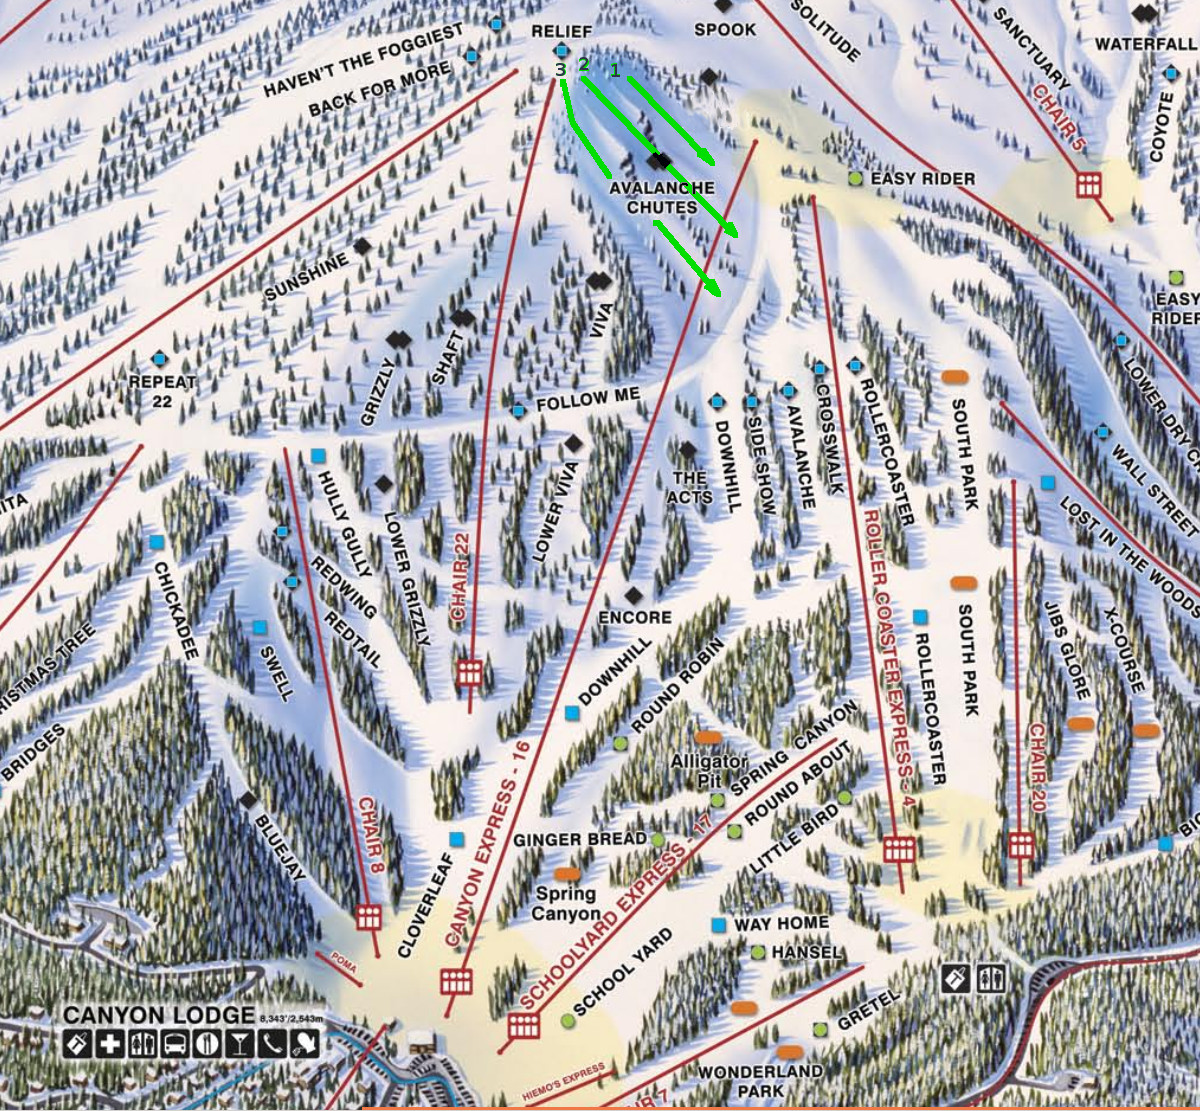 Trail map of Avalanche Chutes at Mammoth Mountain